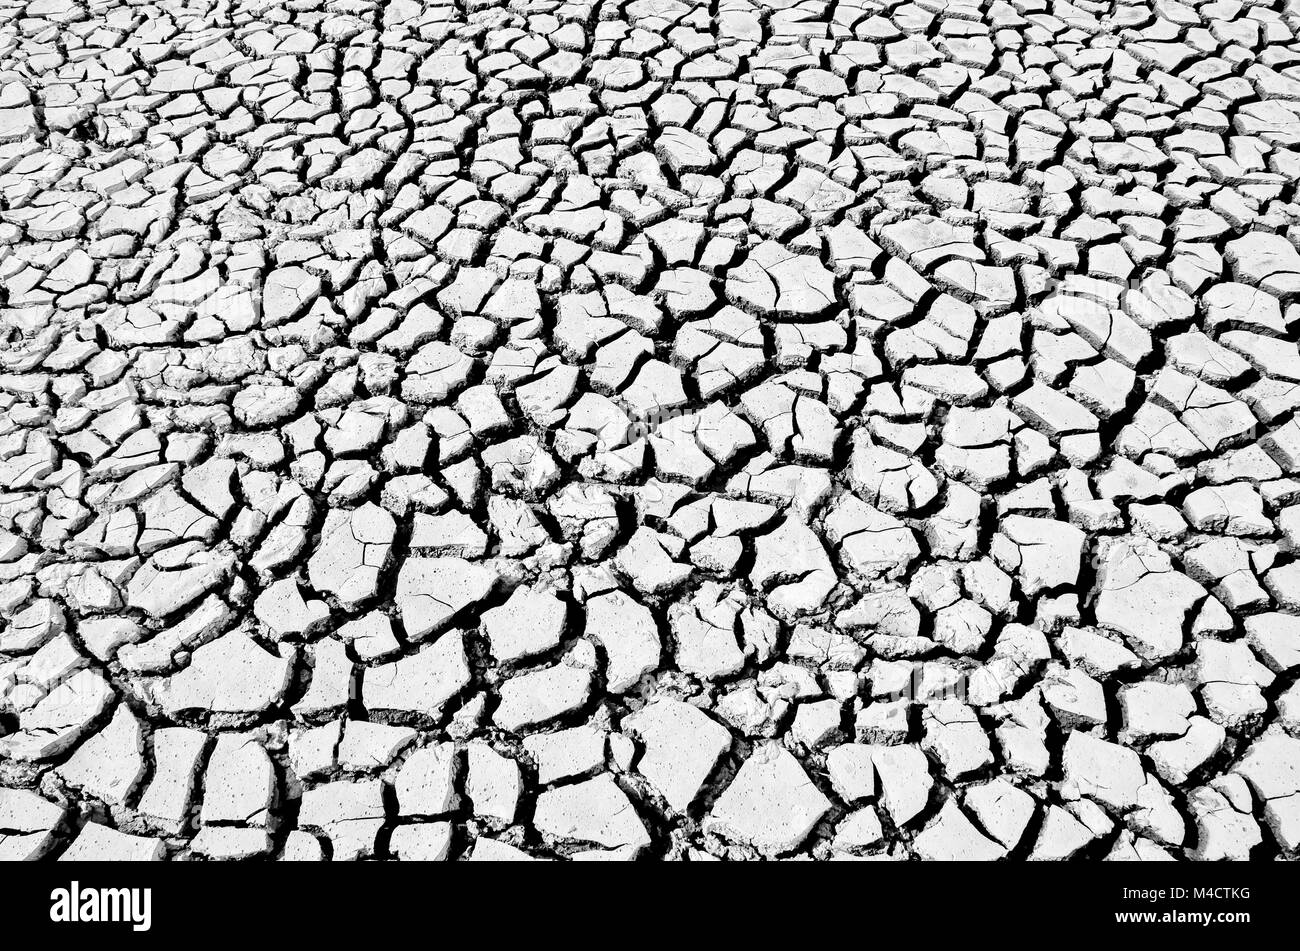 soil drought cracks texture background for design. black and white picture Stock Photo